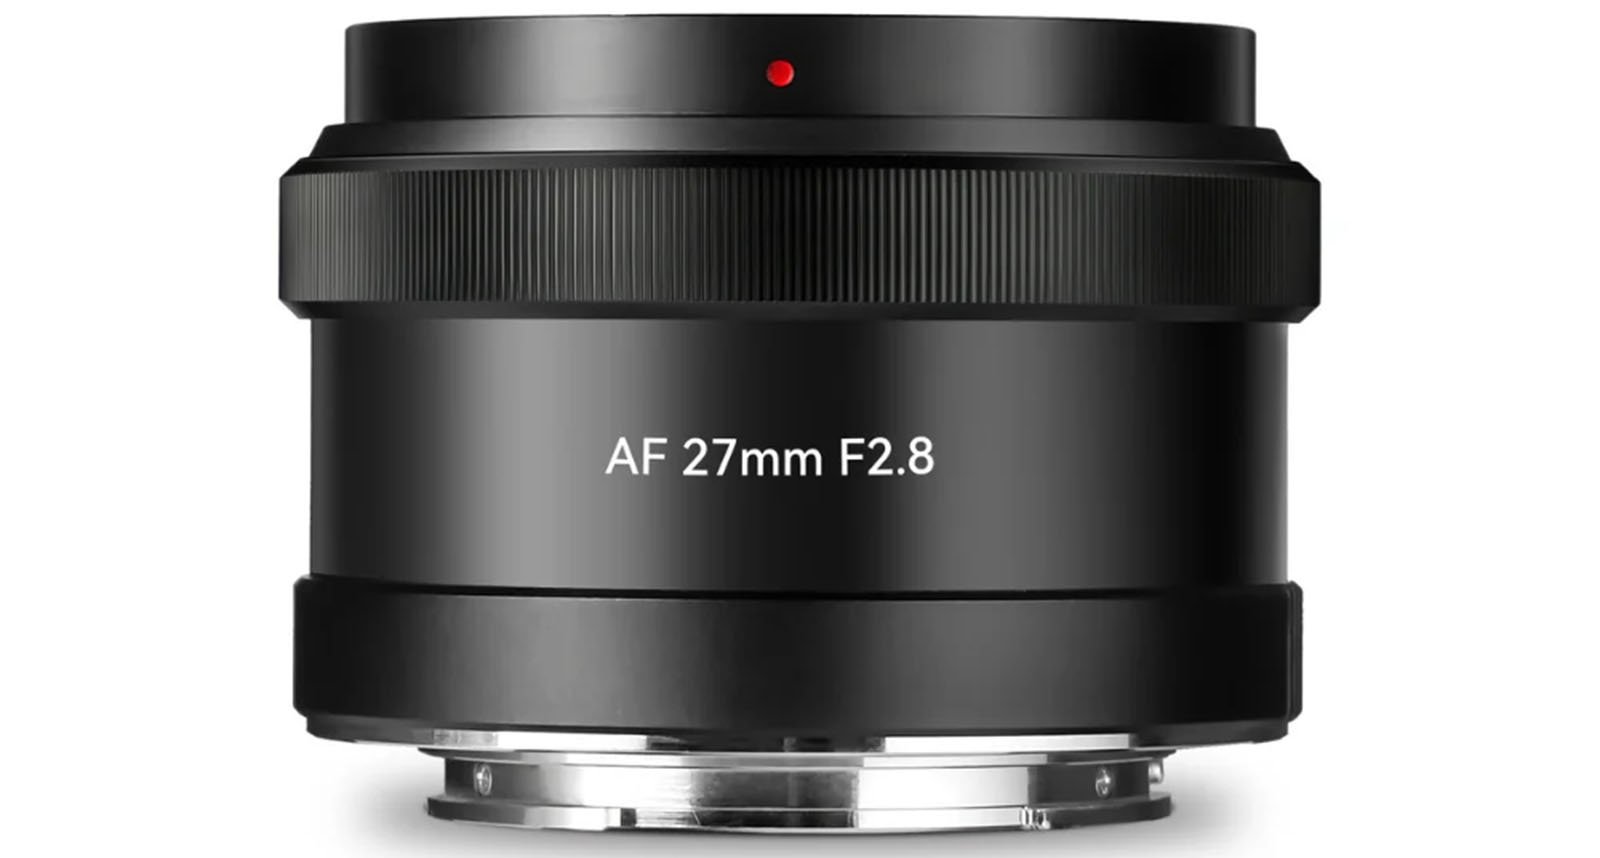 7Artisans Launches 9 27mm f/2.8 Major for Sony APS-C Cameras